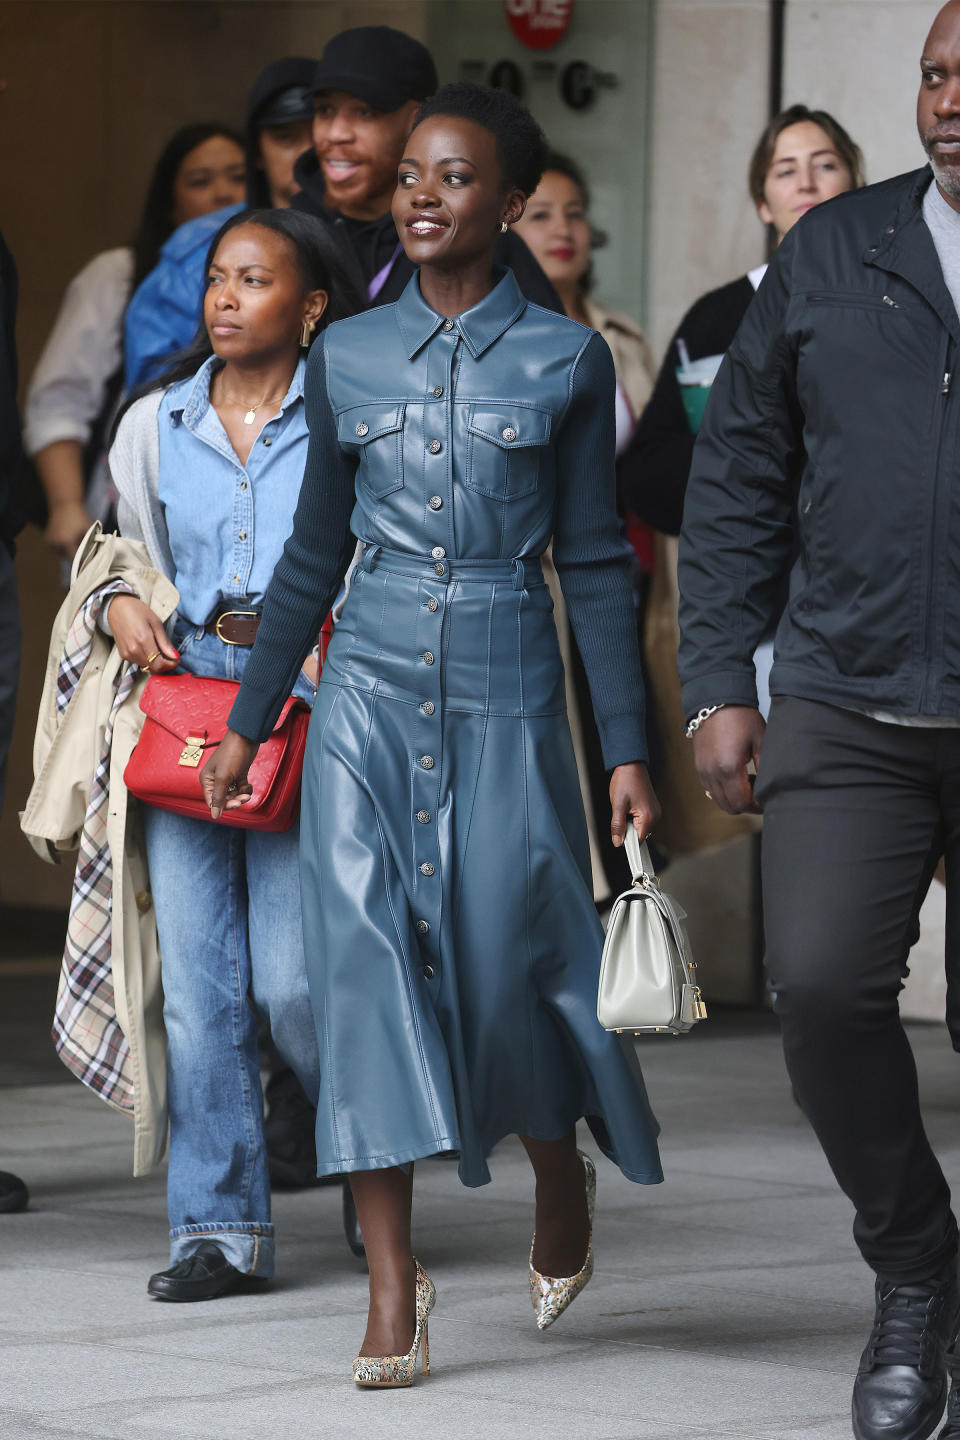 Lupita Nyong'o at BBC Radio One promoting new movie 'A Quiet Place: Day One' wearing pointed shoes